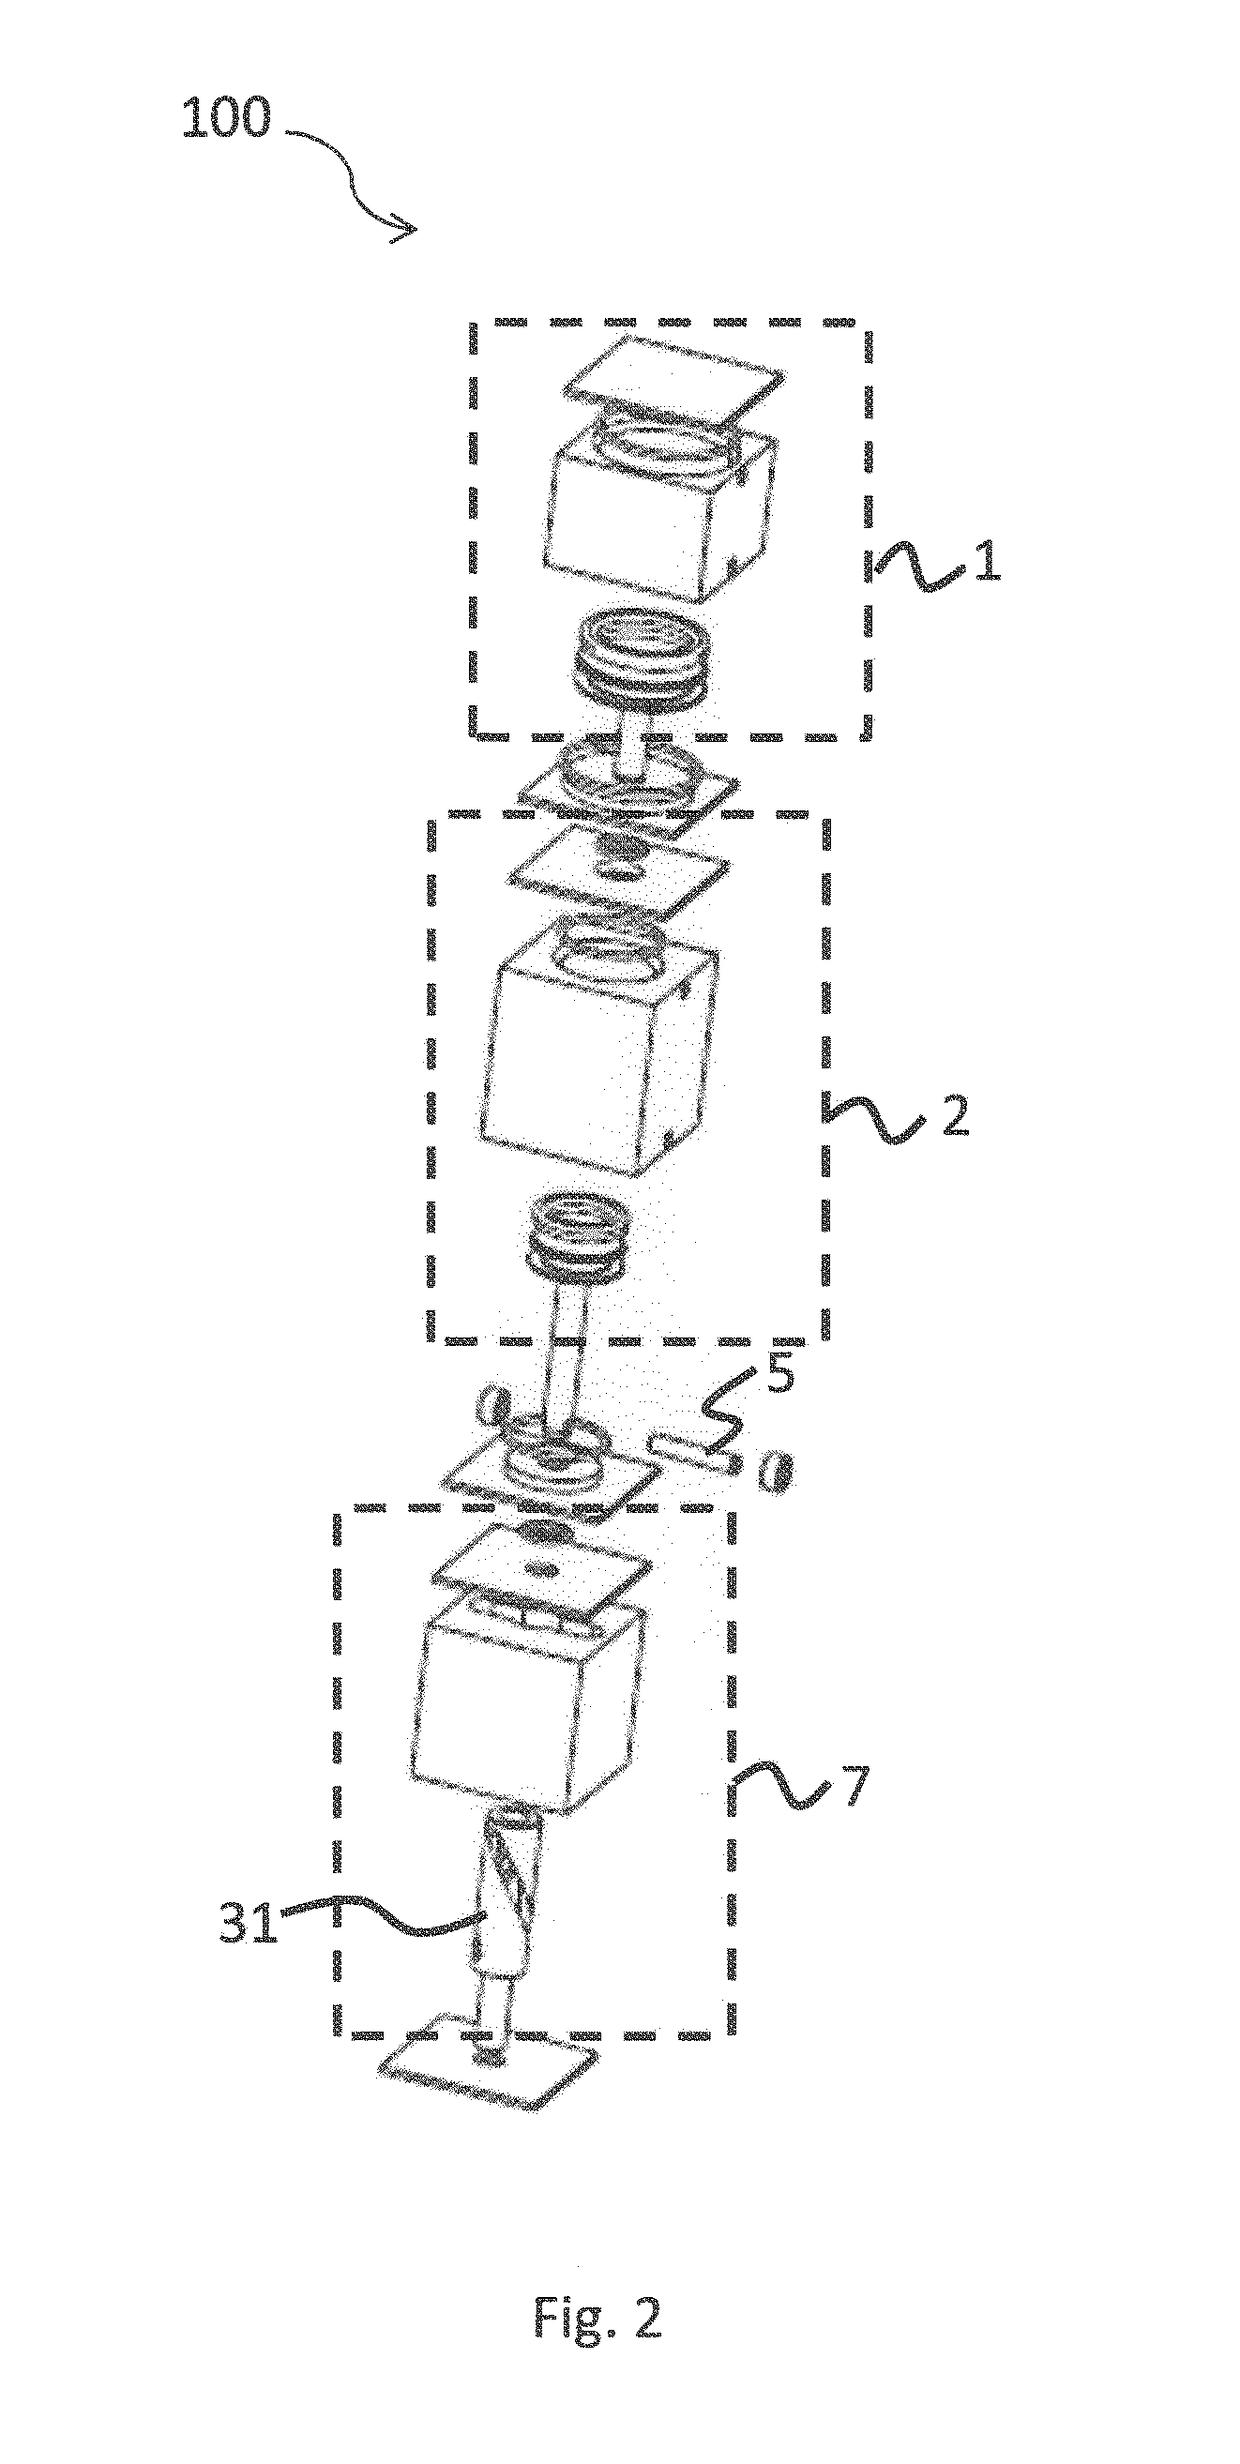 Multi-position rotary actuator controlled by a fluid